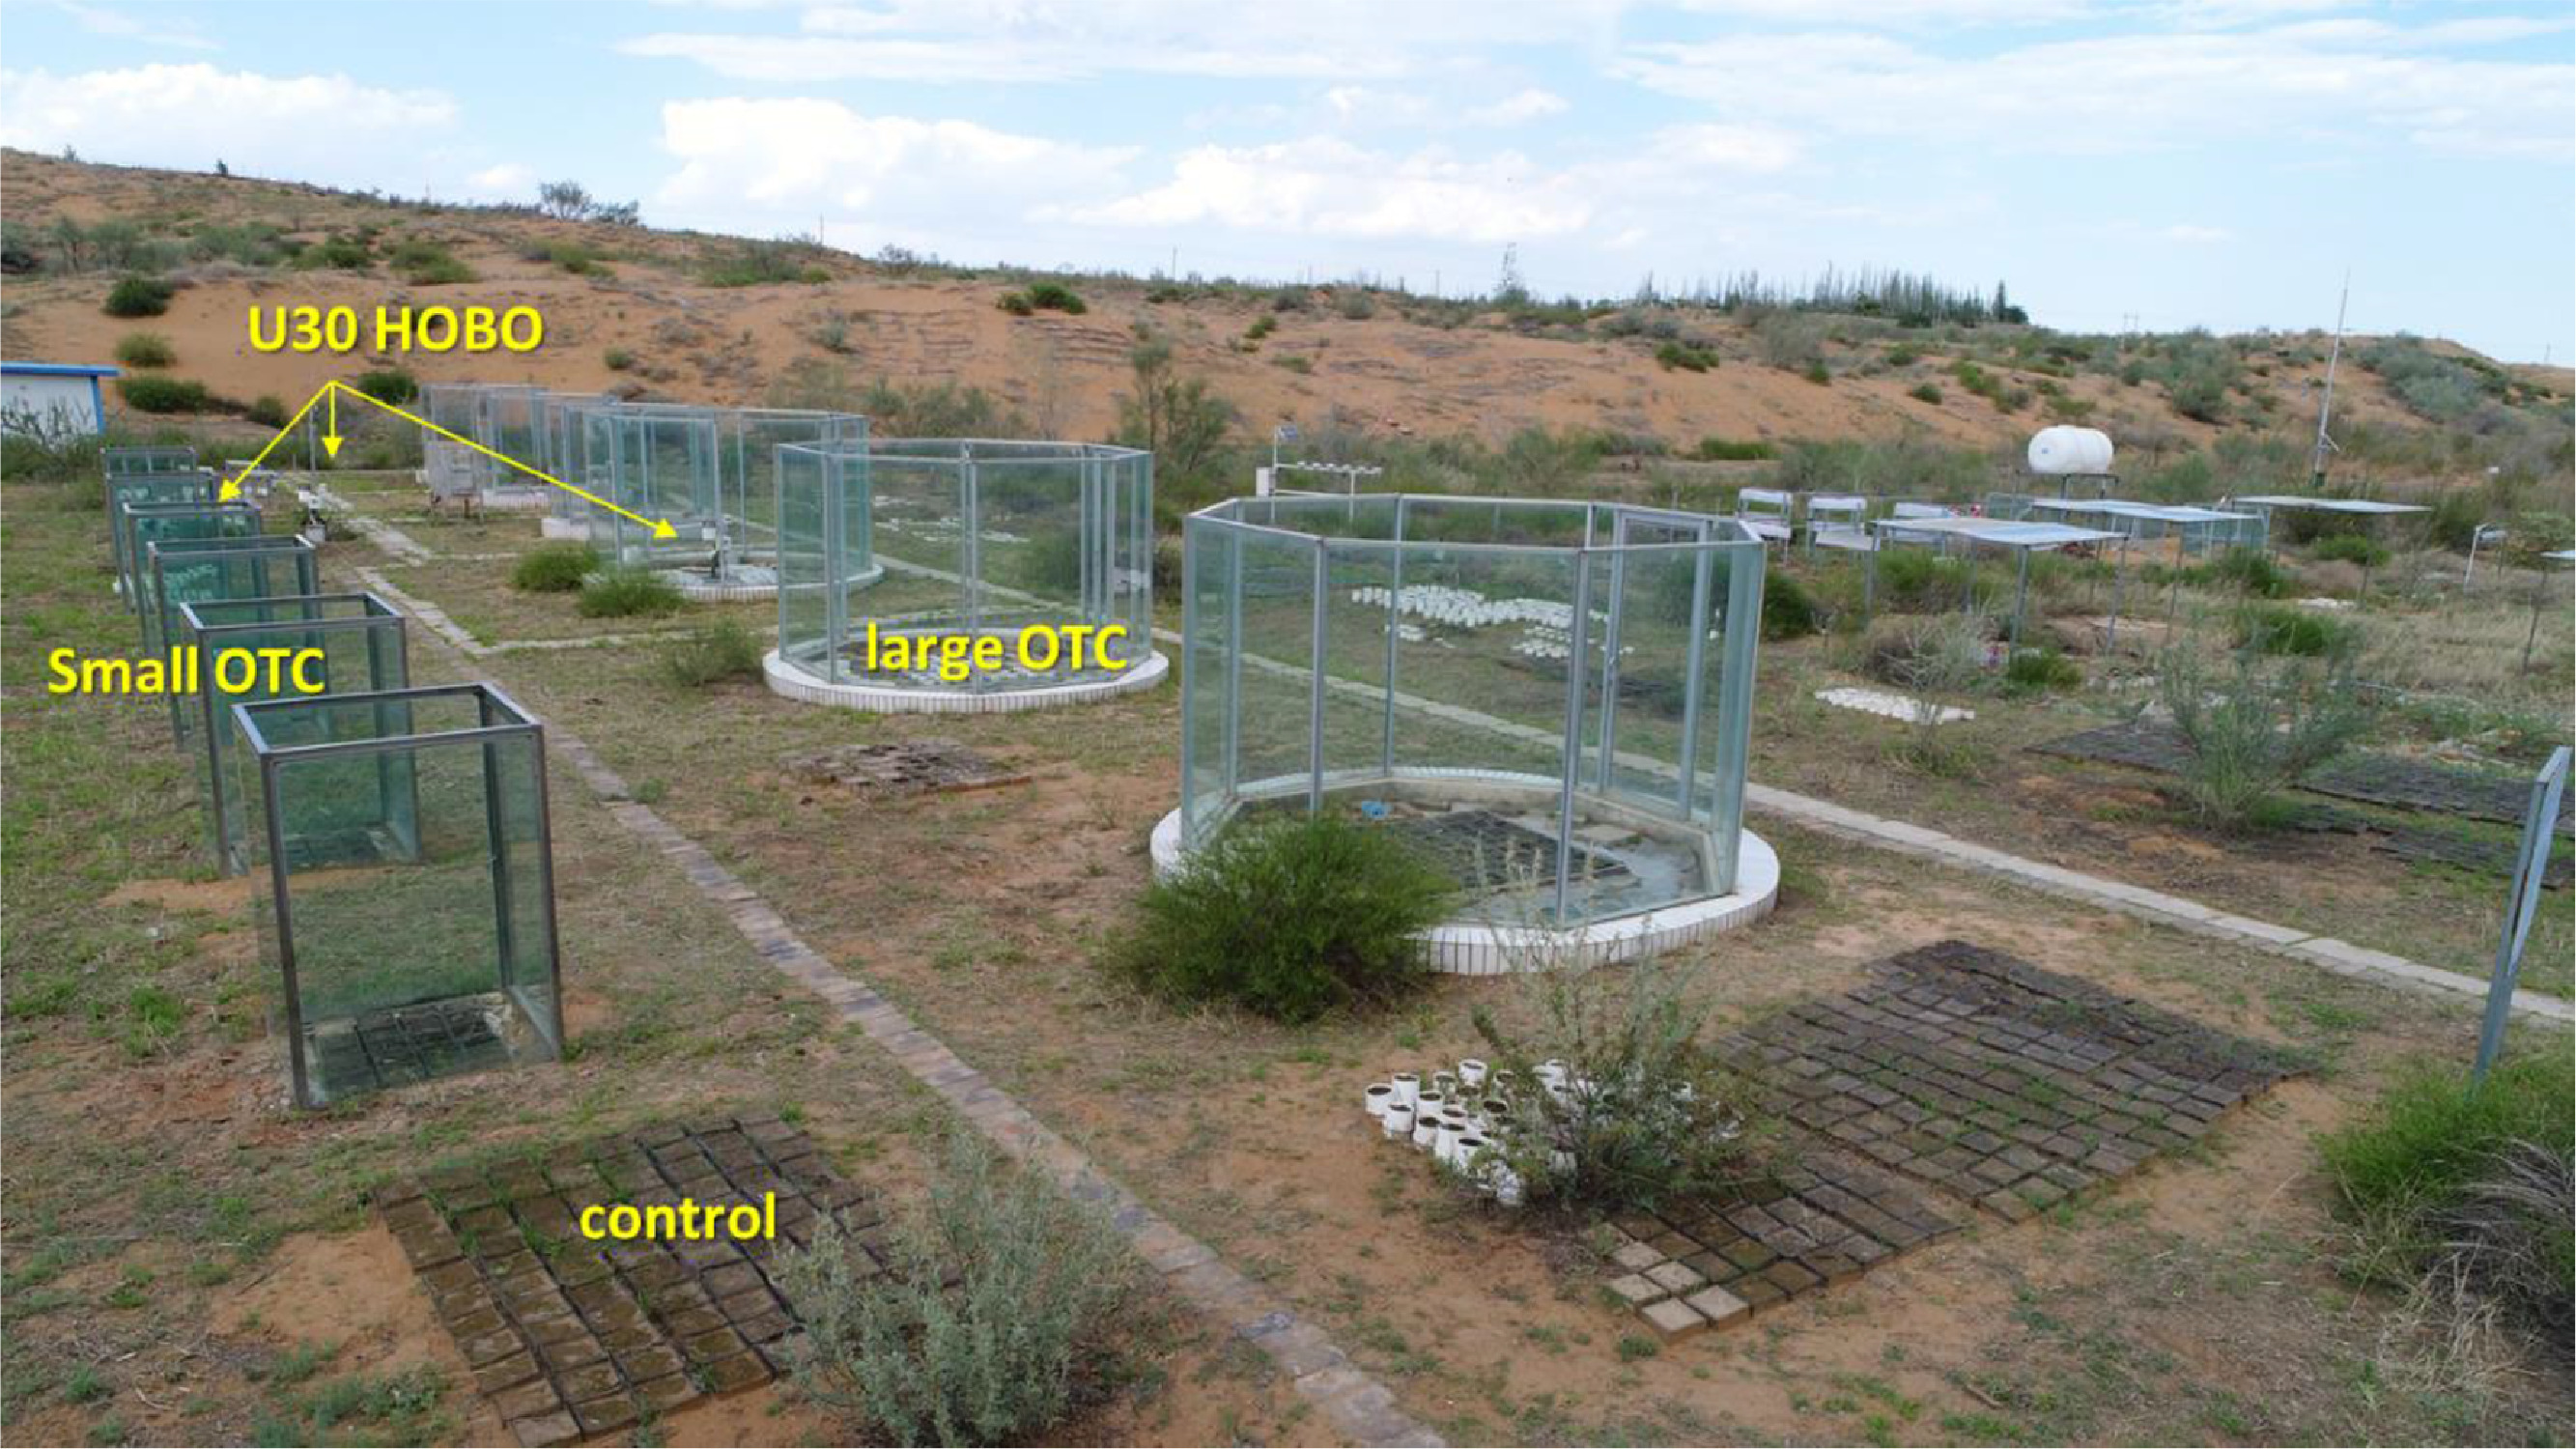 Open-Top Chambers (OTCs) of different size were employed to simulate warming